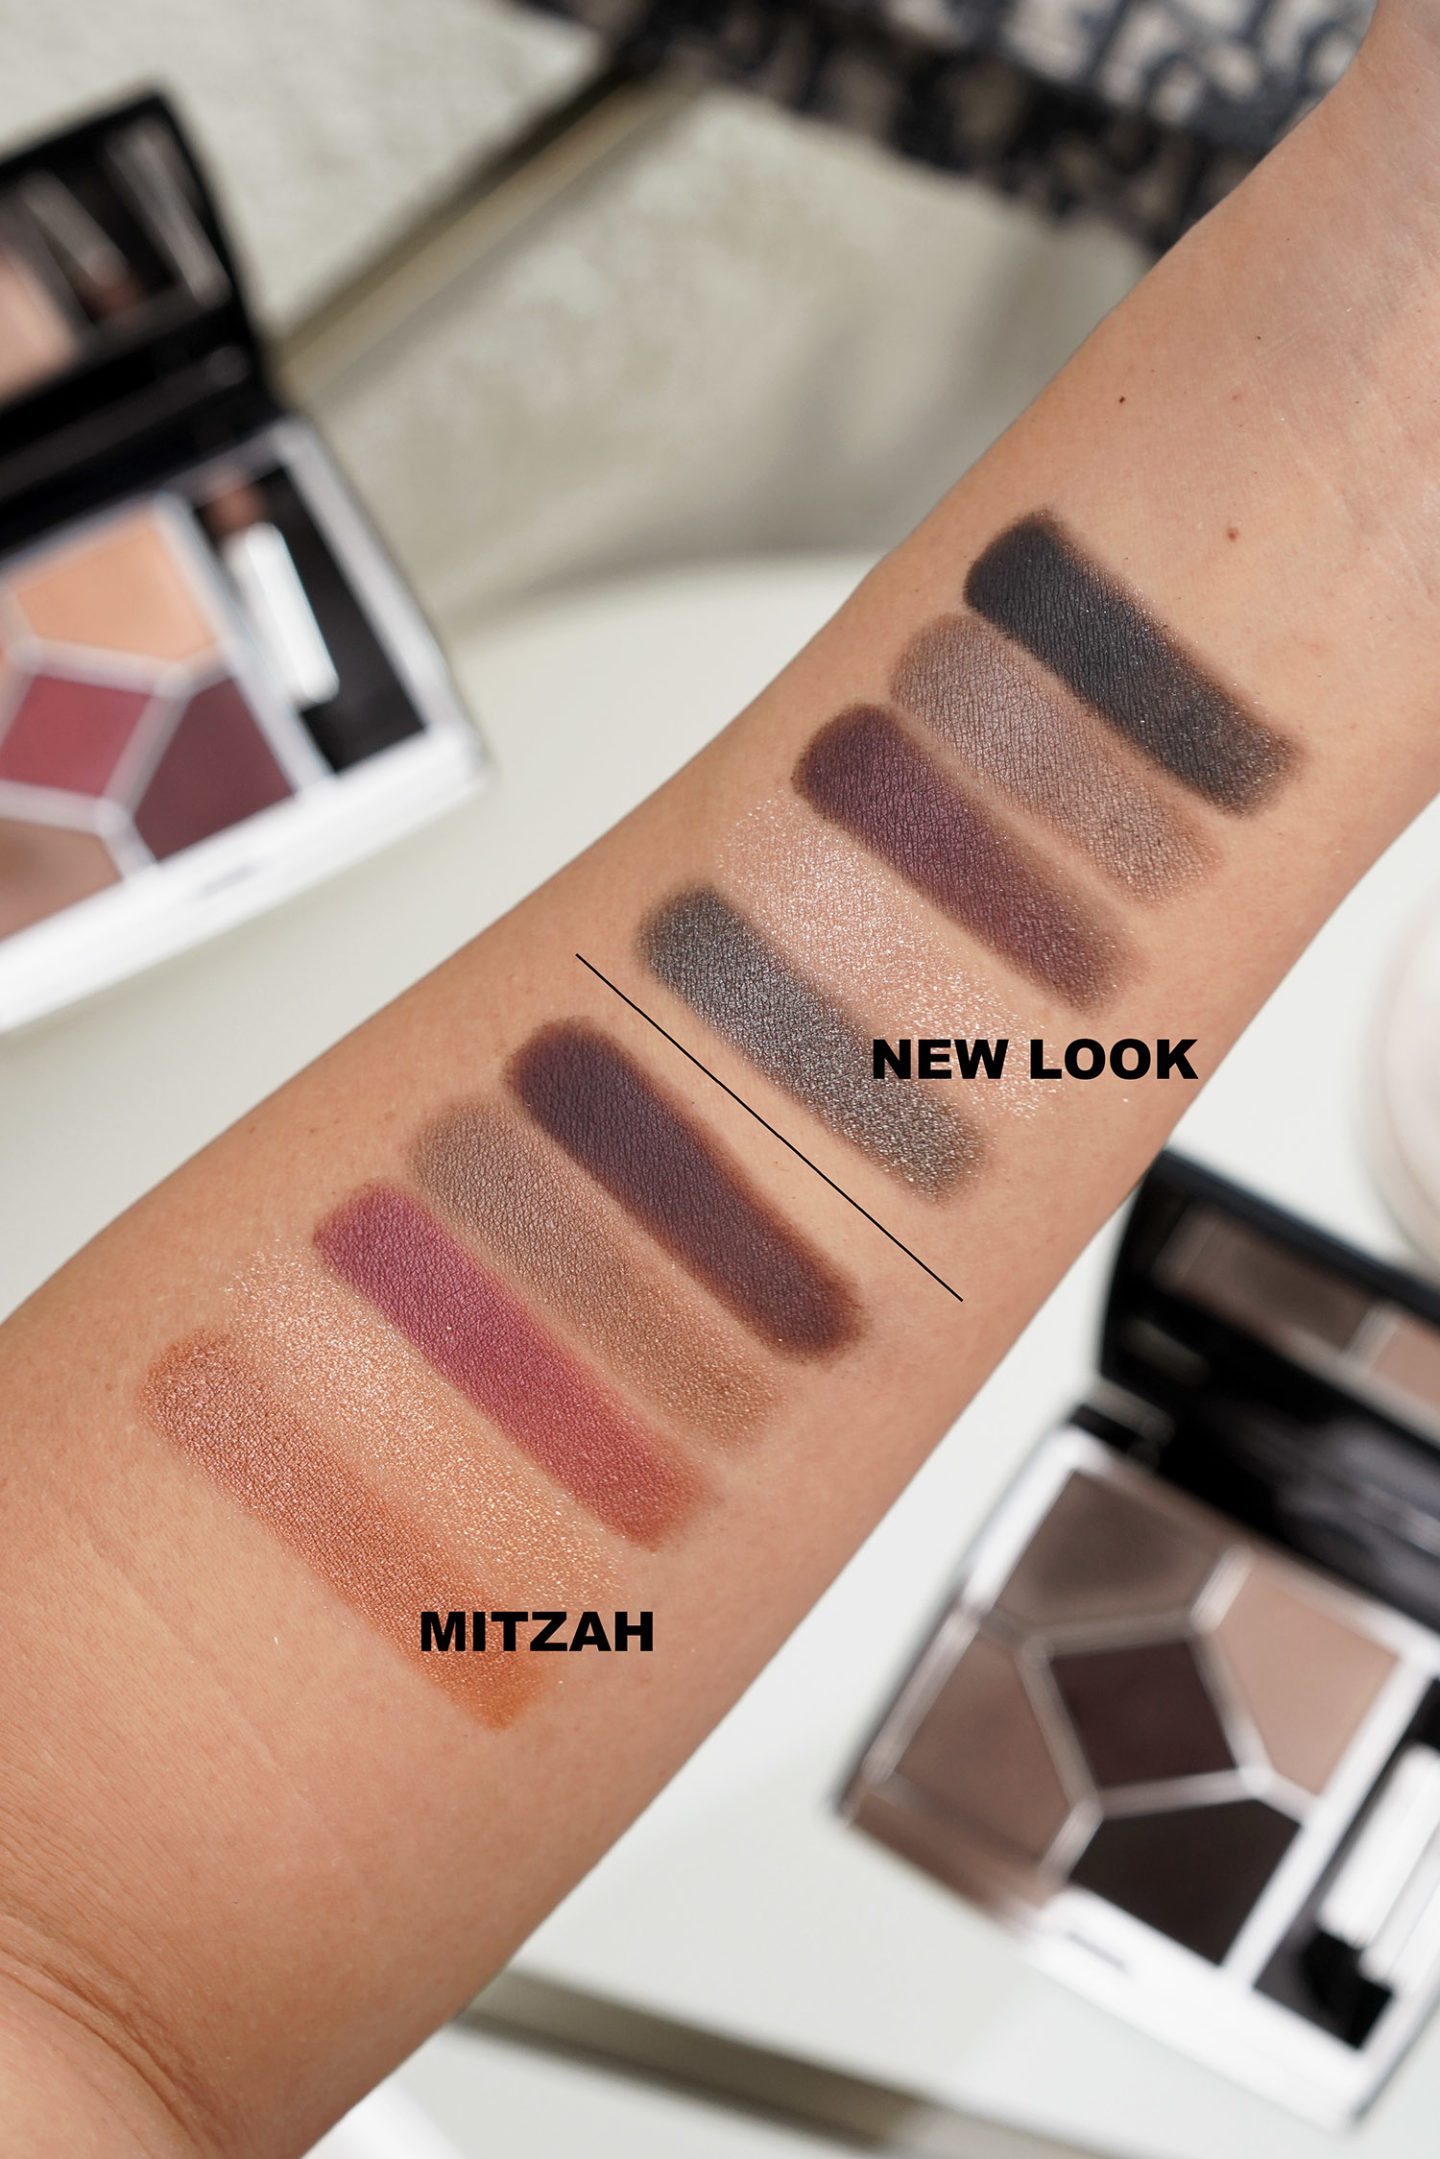 Dior 5 Couleurs Couture Eyeshadow swatches Mitzah and New Look